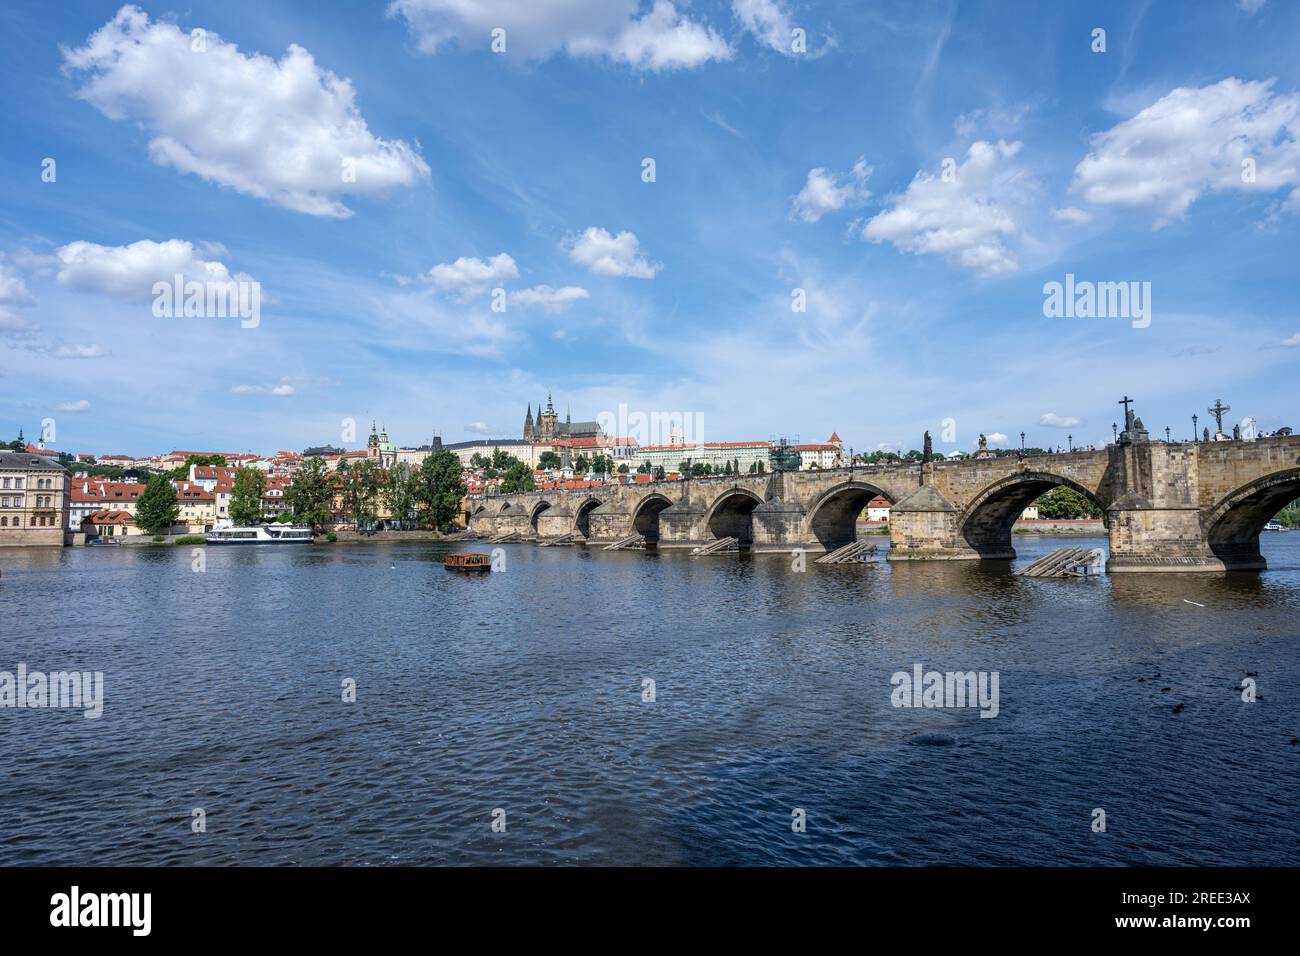 The famous Charles Bridge and the Castle Hradcany in Prague on a sunny day Stock Photo